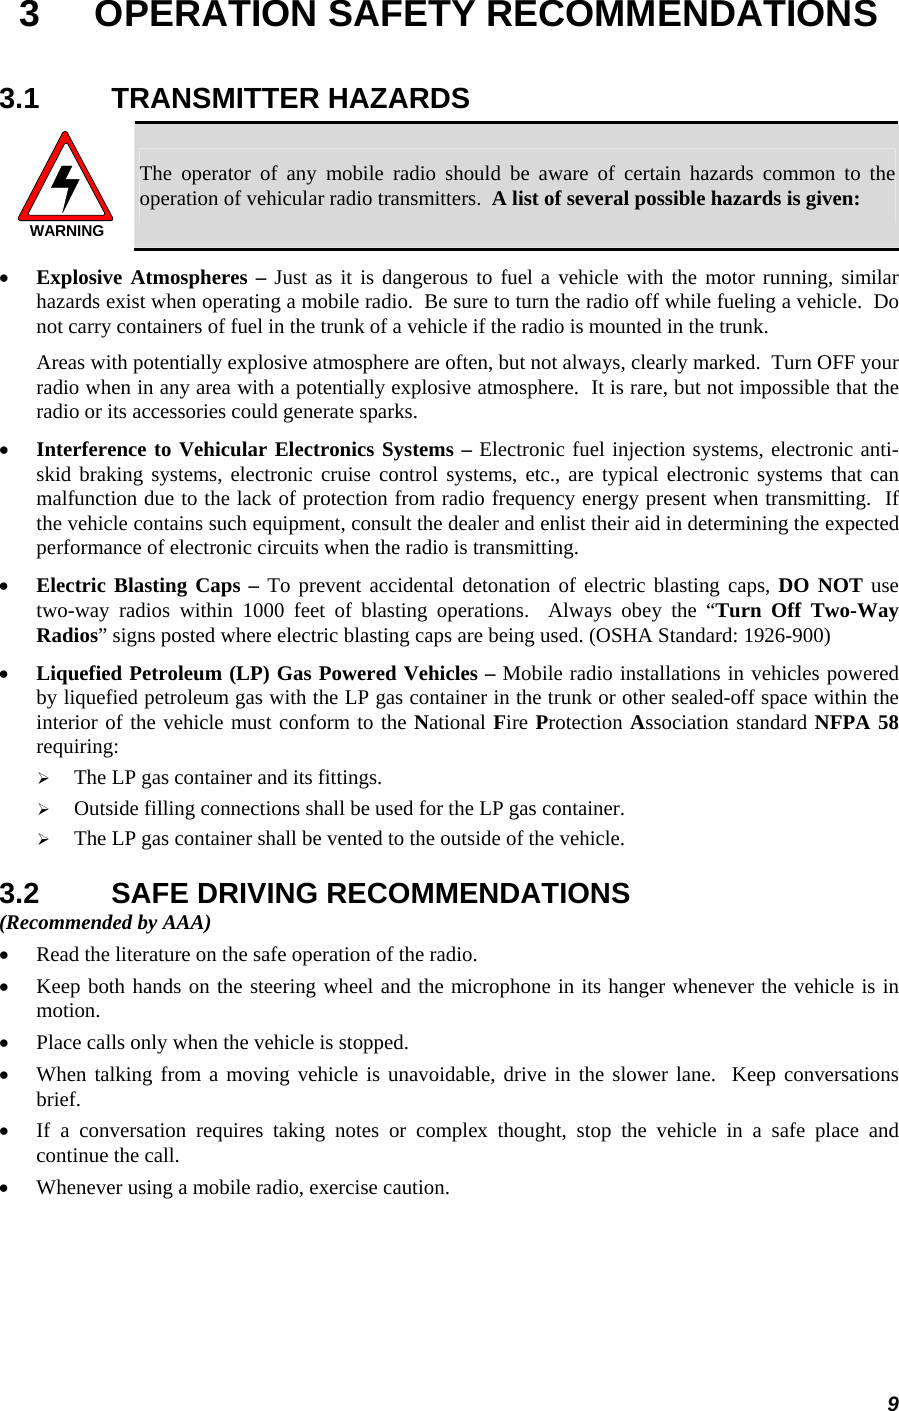 9 3  OPERATION SAFETY RECOMMENDATIONS 3.1 TRANSMITTER HAZARDS WARNING The operator of any mobile radio should be aware of certain hazards common to the operation of vehicular radio transmitters.  A list of several possible hazards is given: • Explosive Atmospheres – Just as it is dangerous to fuel a vehicle with the motor running, similar hazards exist when operating a mobile radio.  Be sure to turn the radio off while fueling a vehicle.  Do not carry containers of fuel in the trunk of a vehicle if the radio is mounted in the trunk. Areas with potentially explosive atmosphere are often, but not always, clearly marked.  Turn OFF your radio when in any area with a potentially explosive atmosphere.  It is rare, but not impossible that the radio or its accessories could generate sparks. • Interference to Vehicular Electronics Systems – Electronic fuel injection systems, electronic anti-skid braking systems, electronic cruise control systems, etc., are typical electronic systems that can malfunction due to the lack of protection from radio frequency energy present when transmitting.  If the vehicle contains such equipment, consult the dealer and enlist their aid in determining the expected performance of electronic circuits when the radio is transmitting. • Electric Blasting Caps – To prevent accidental detonation of electric blasting caps, DO NOT use two-way radios within 1000 feet of blasting operations.  Always obey the “Turn Off Two-Way Radios” signs posted where electric blasting caps are being used. (OSHA Standard: 1926-900) • Liquefied Petroleum (LP) Gas Powered Vehicles – Mobile radio installations in vehicles powered by liquefied petroleum gas with the LP gas container in the trunk or other sealed-off space within the interior of the vehicle must conform to the National Fire Protection Association standard NFPA 58 requiring: ¾ The LP gas container and its fittings. ¾ Outside filling connections shall be used for the LP gas container. ¾ The LP gas container shall be vented to the outside of the vehicle. 3.2  SAFE DRIVING RECOMMENDATIONS (Recommended by AAA) • Read the literature on the safe operation of the radio. • Keep both hands on the steering wheel and the microphone in its hanger whenever the vehicle is in motion. • Place calls only when the vehicle is stopped. • When talking from a moving vehicle is unavoidable, drive in the slower lane.  Keep conversations brief. • If a conversation requires taking notes or complex thought, stop the vehicle in a safe place and continue the call. • Whenever using a mobile radio, exercise caution. 